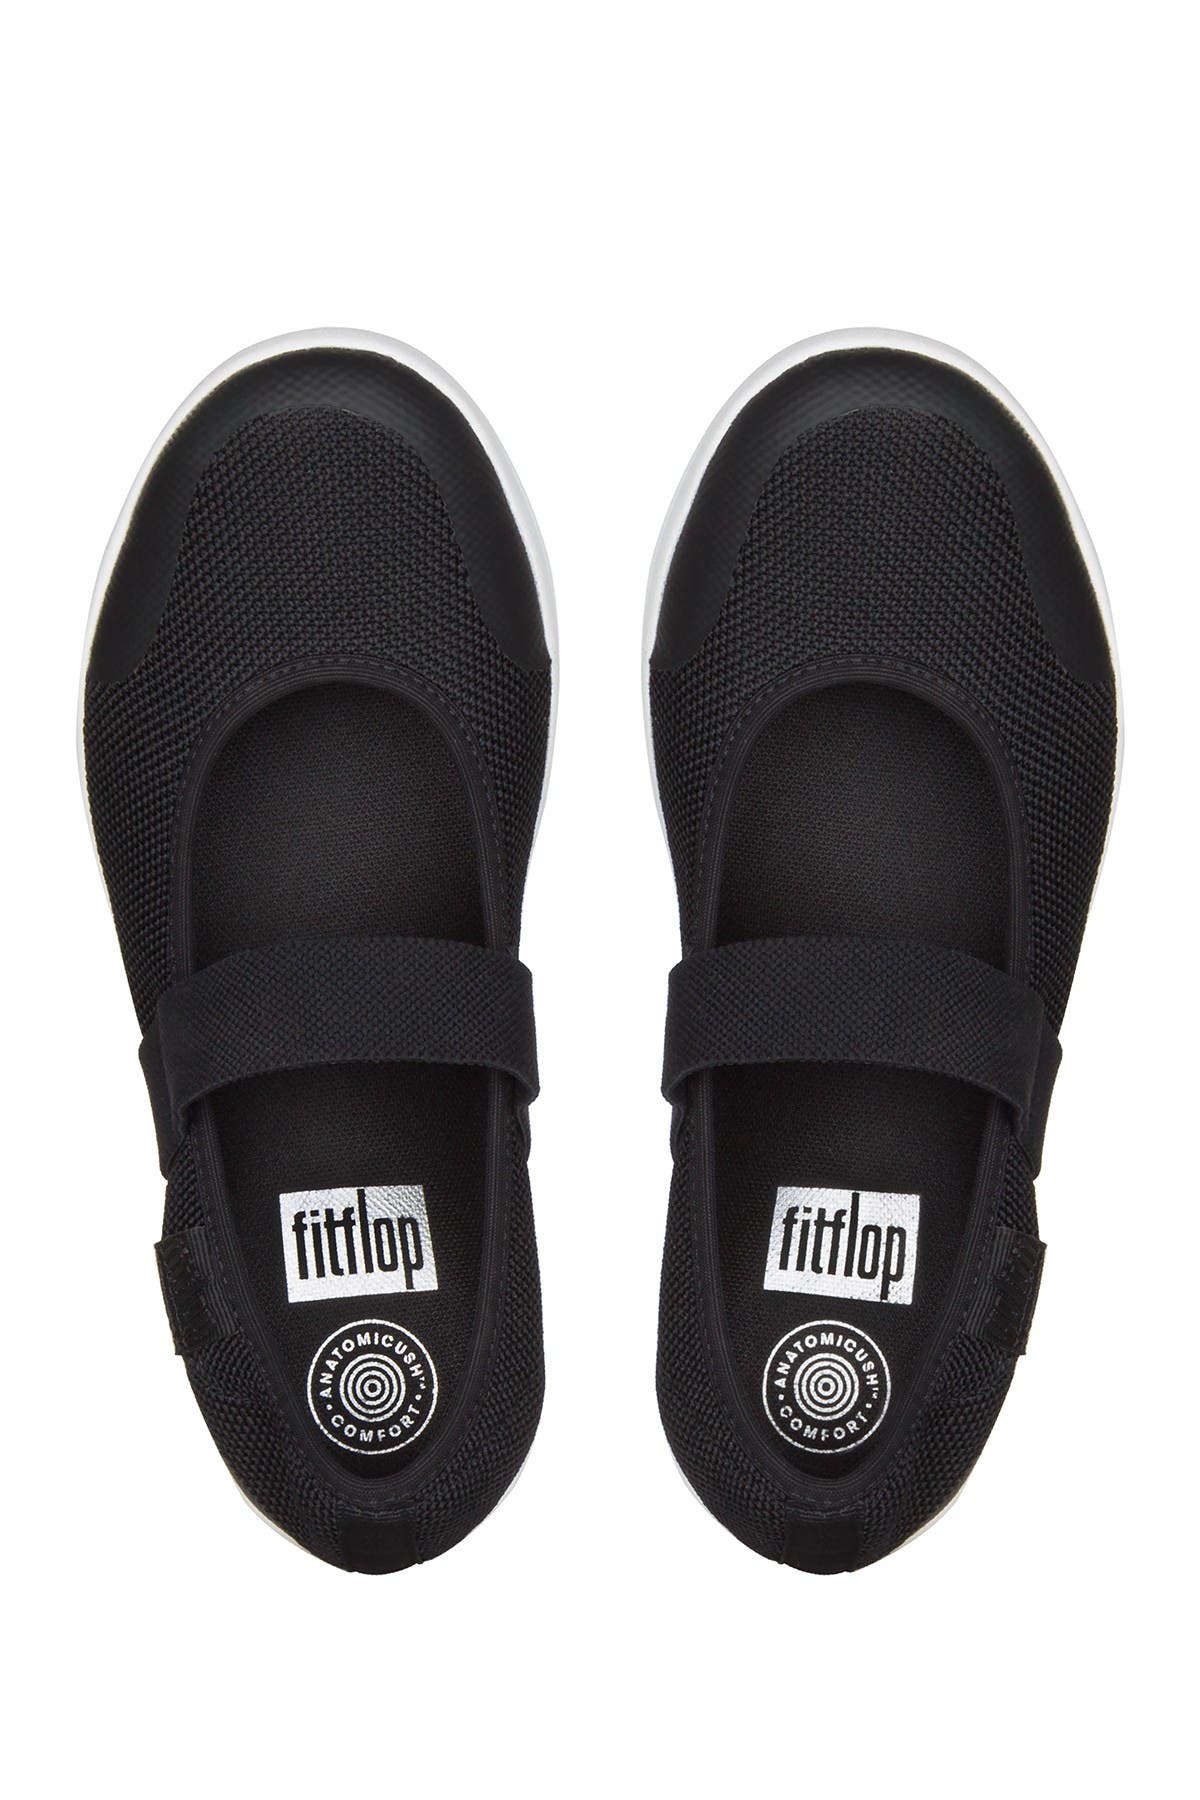 fitflop mary jane shoes